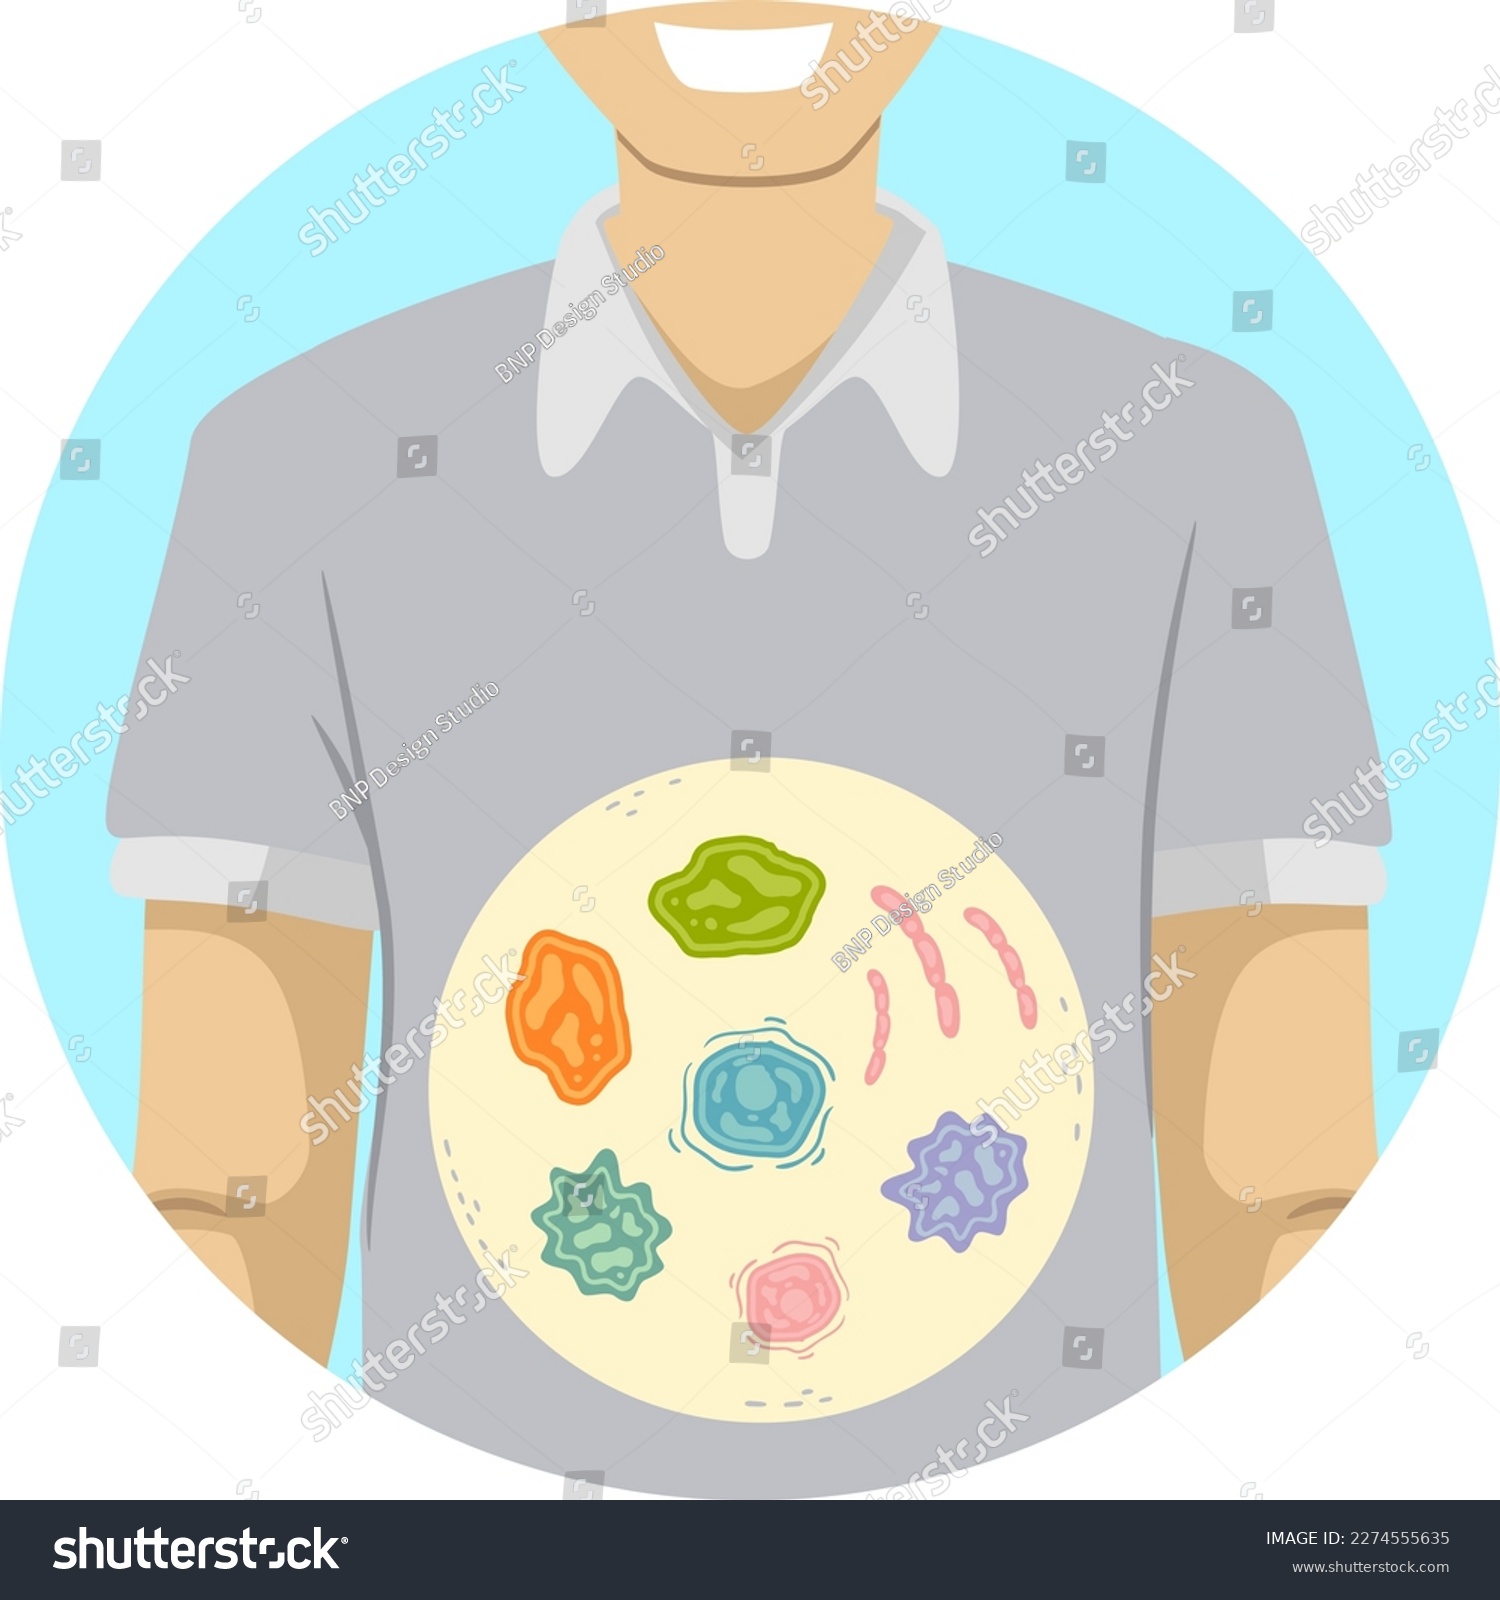 SVG of Illustration of a Man Showing Gut Microbiome. Microorganism Mutualism svg